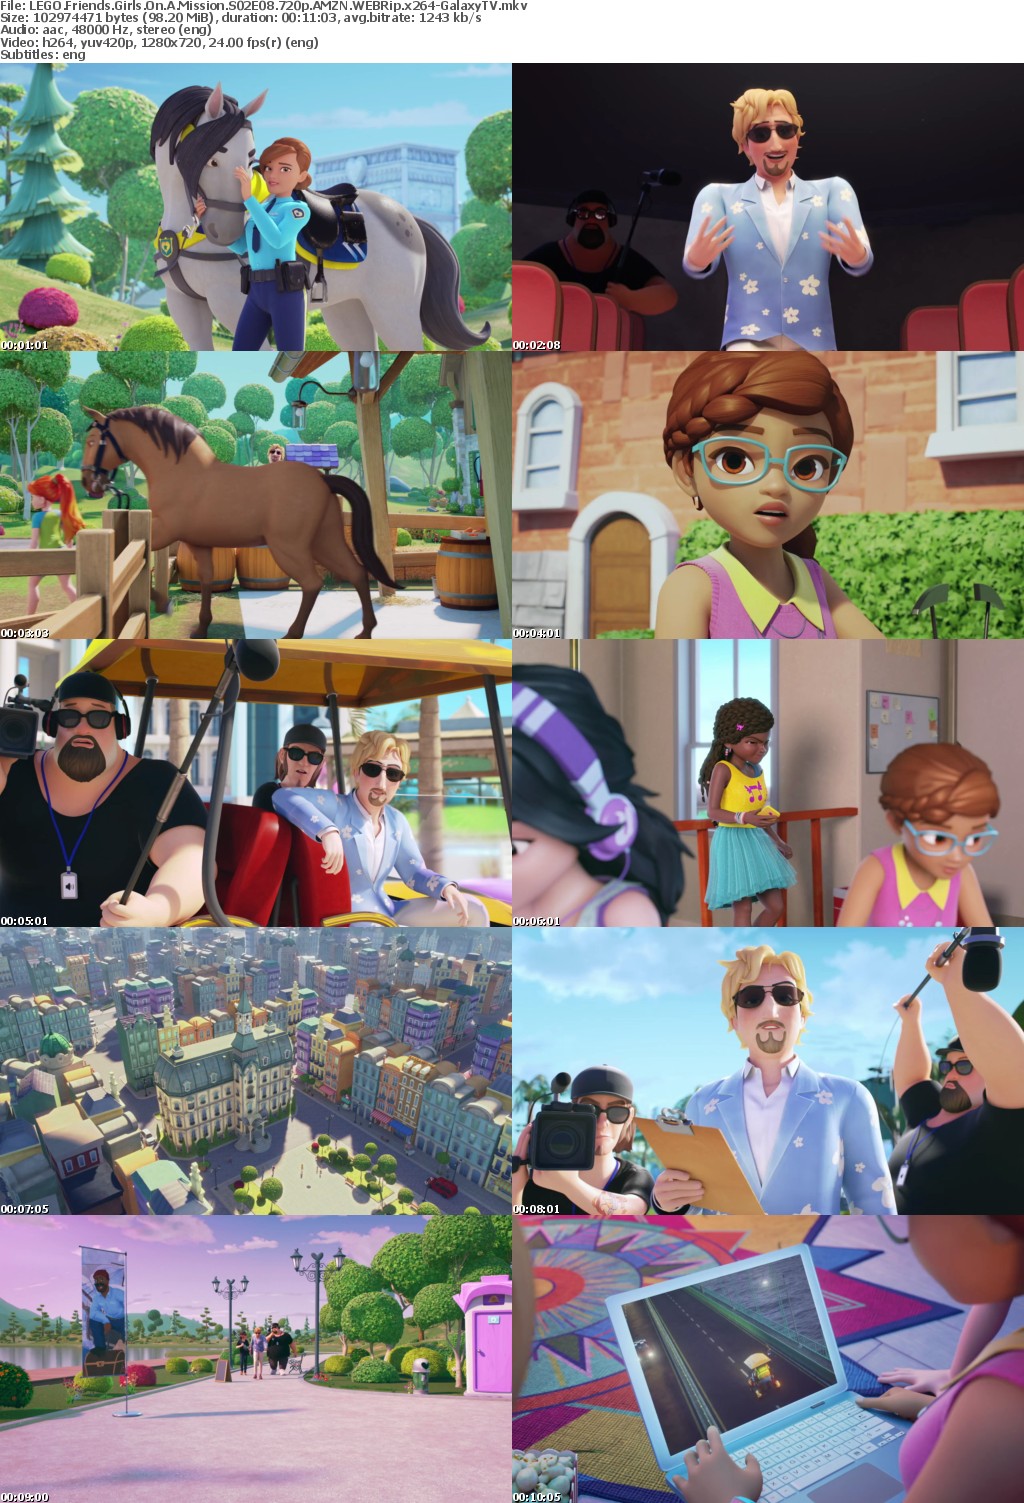 LEGO Friends Girls On A Mission S02 COMPLETE 720p AMZN WEBRip x264-GalaxyTV